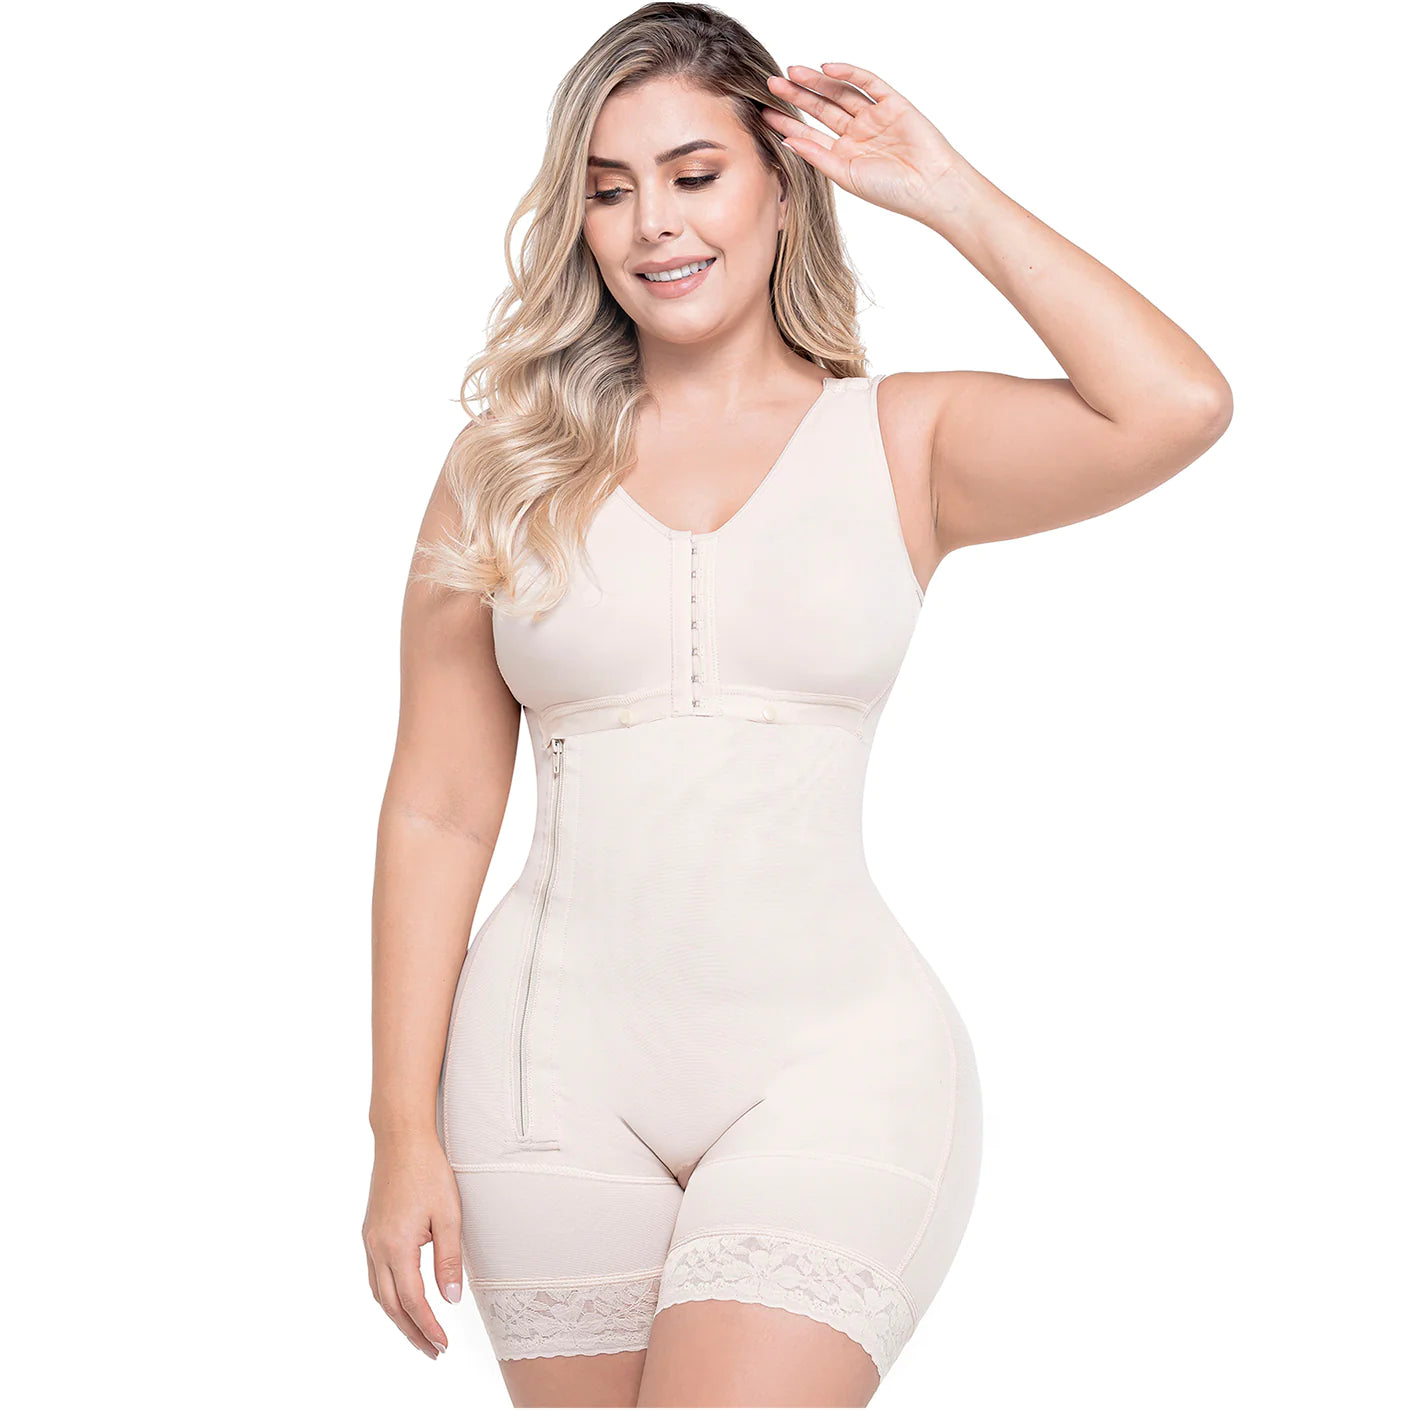 Postpartum C-Section and Post-Surgery BBL Support with Built-in Bra, High Back & Medium Compression Fajas Sonryse 053ZL-1-Shapes Secrets Fajas